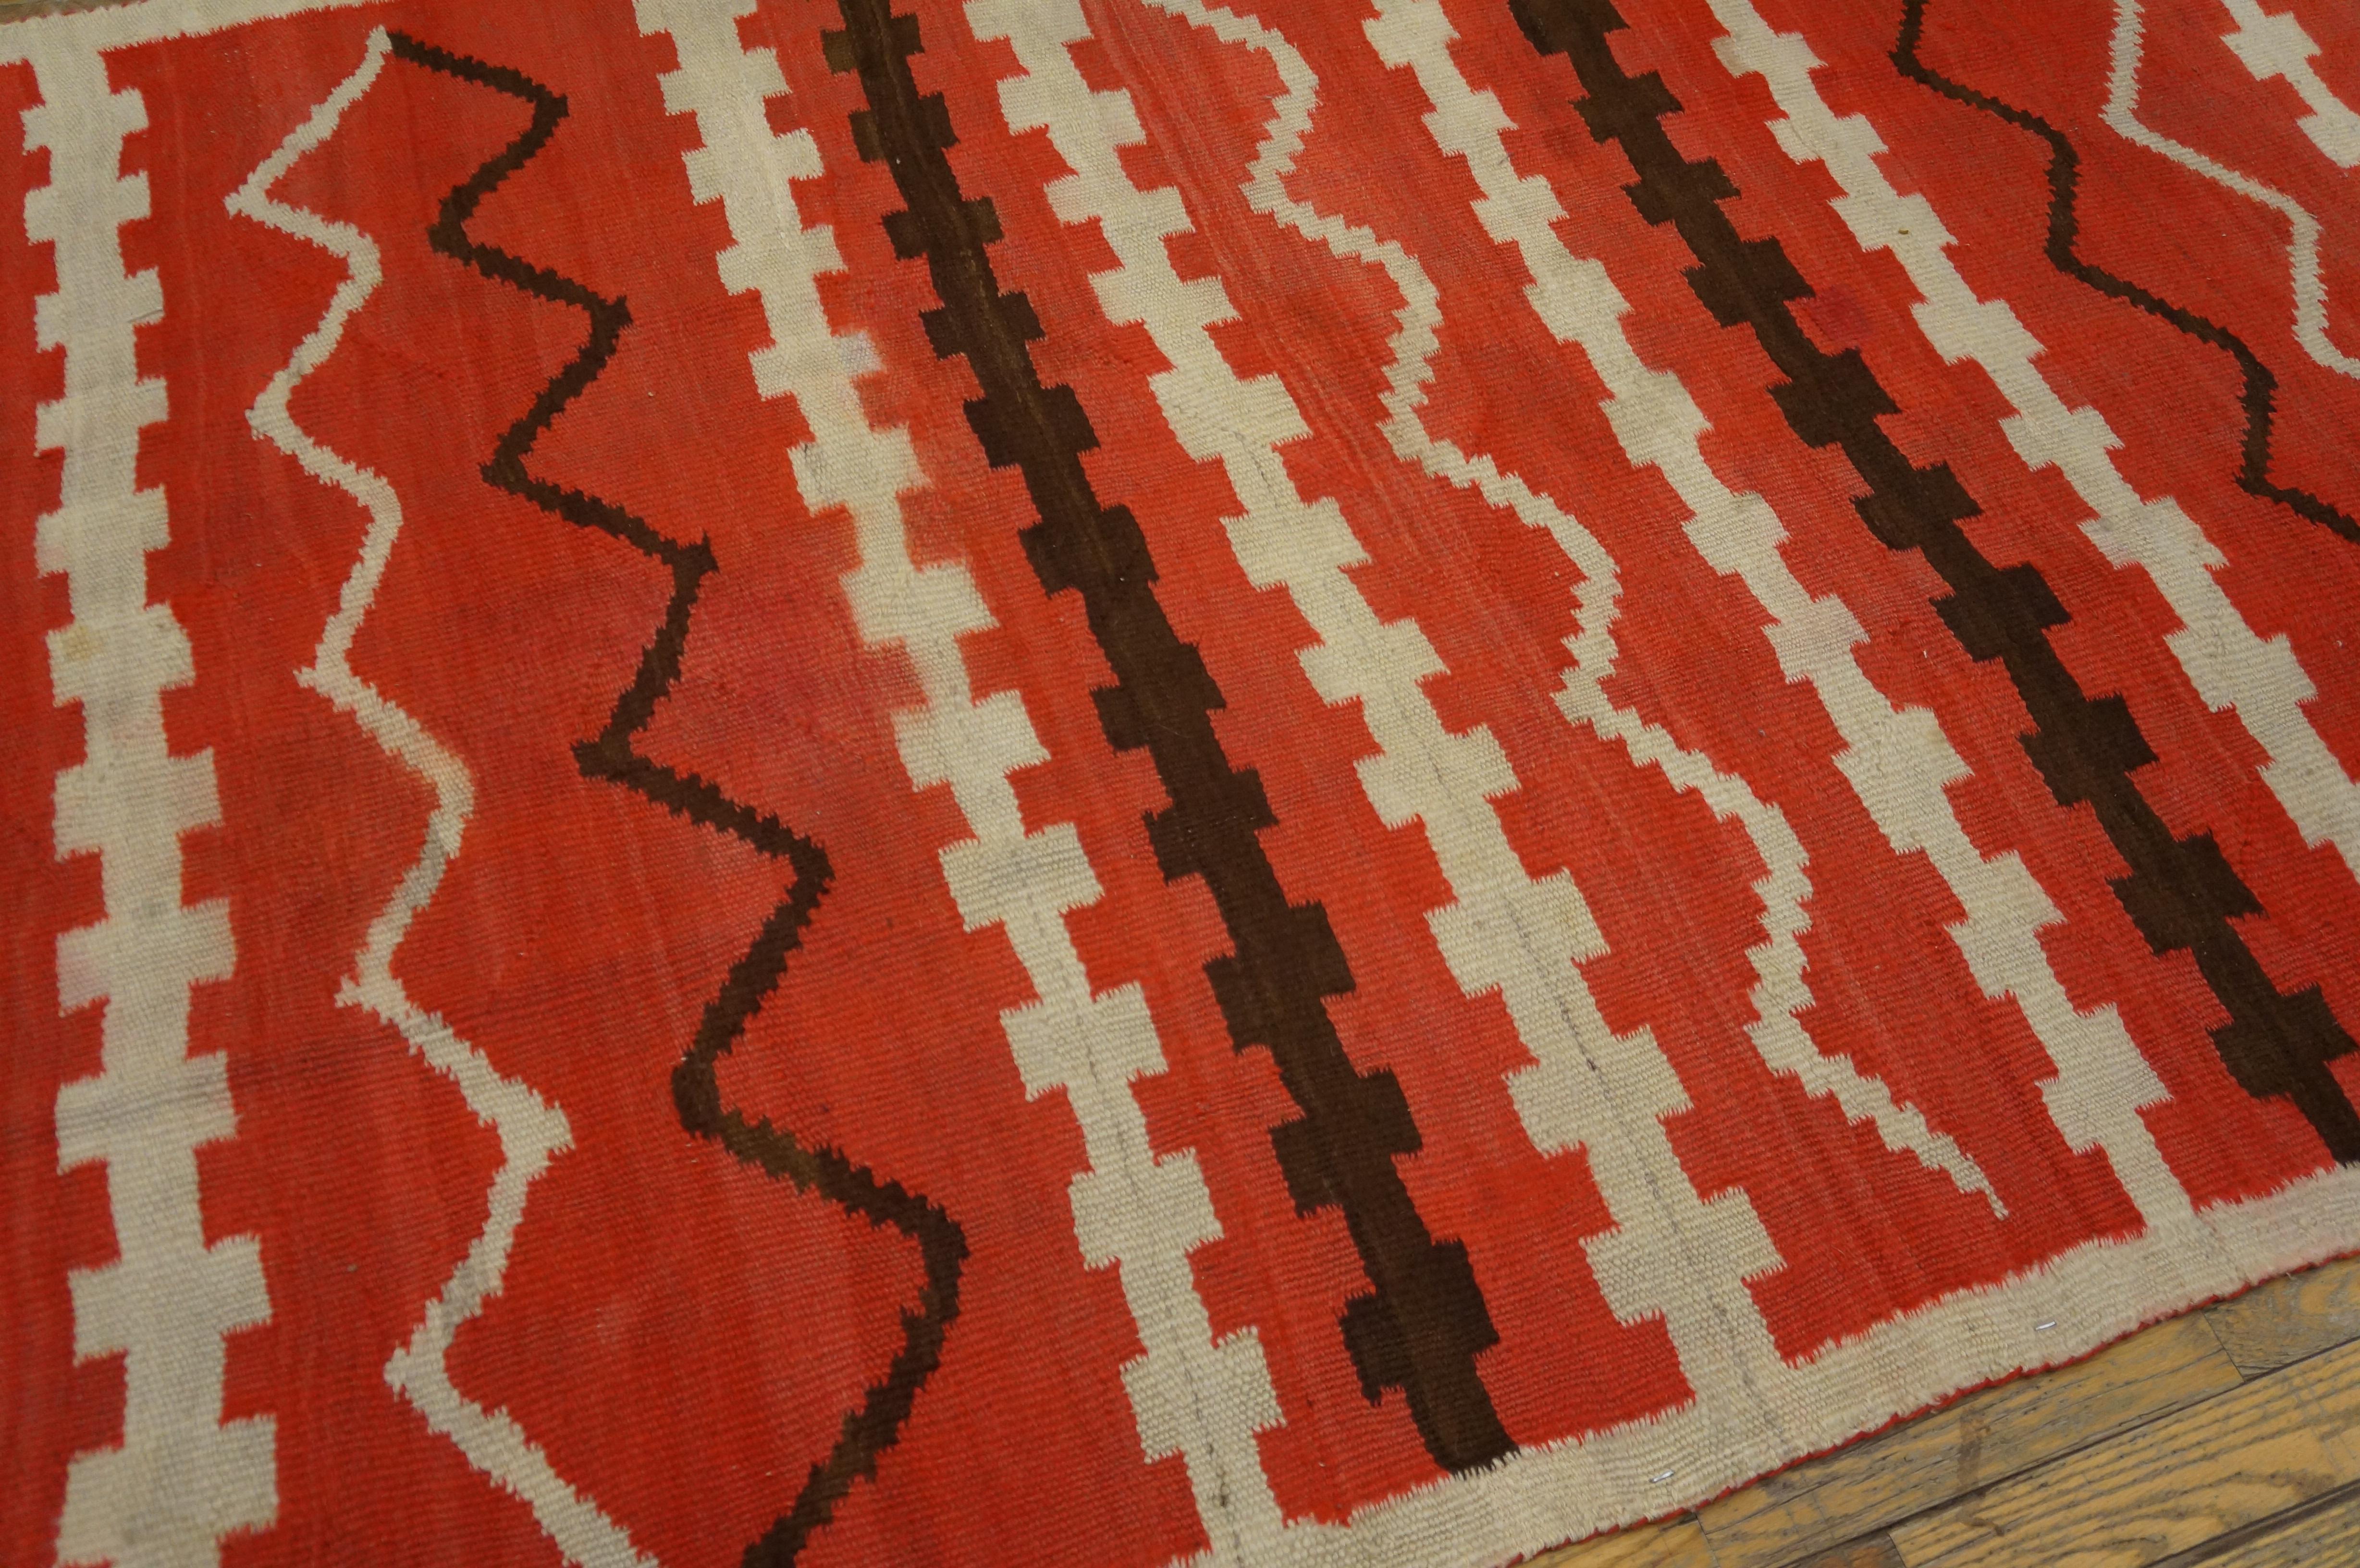 Hand-Woven 19th Century Transitional Period  Navajo Carpet ( 4'4